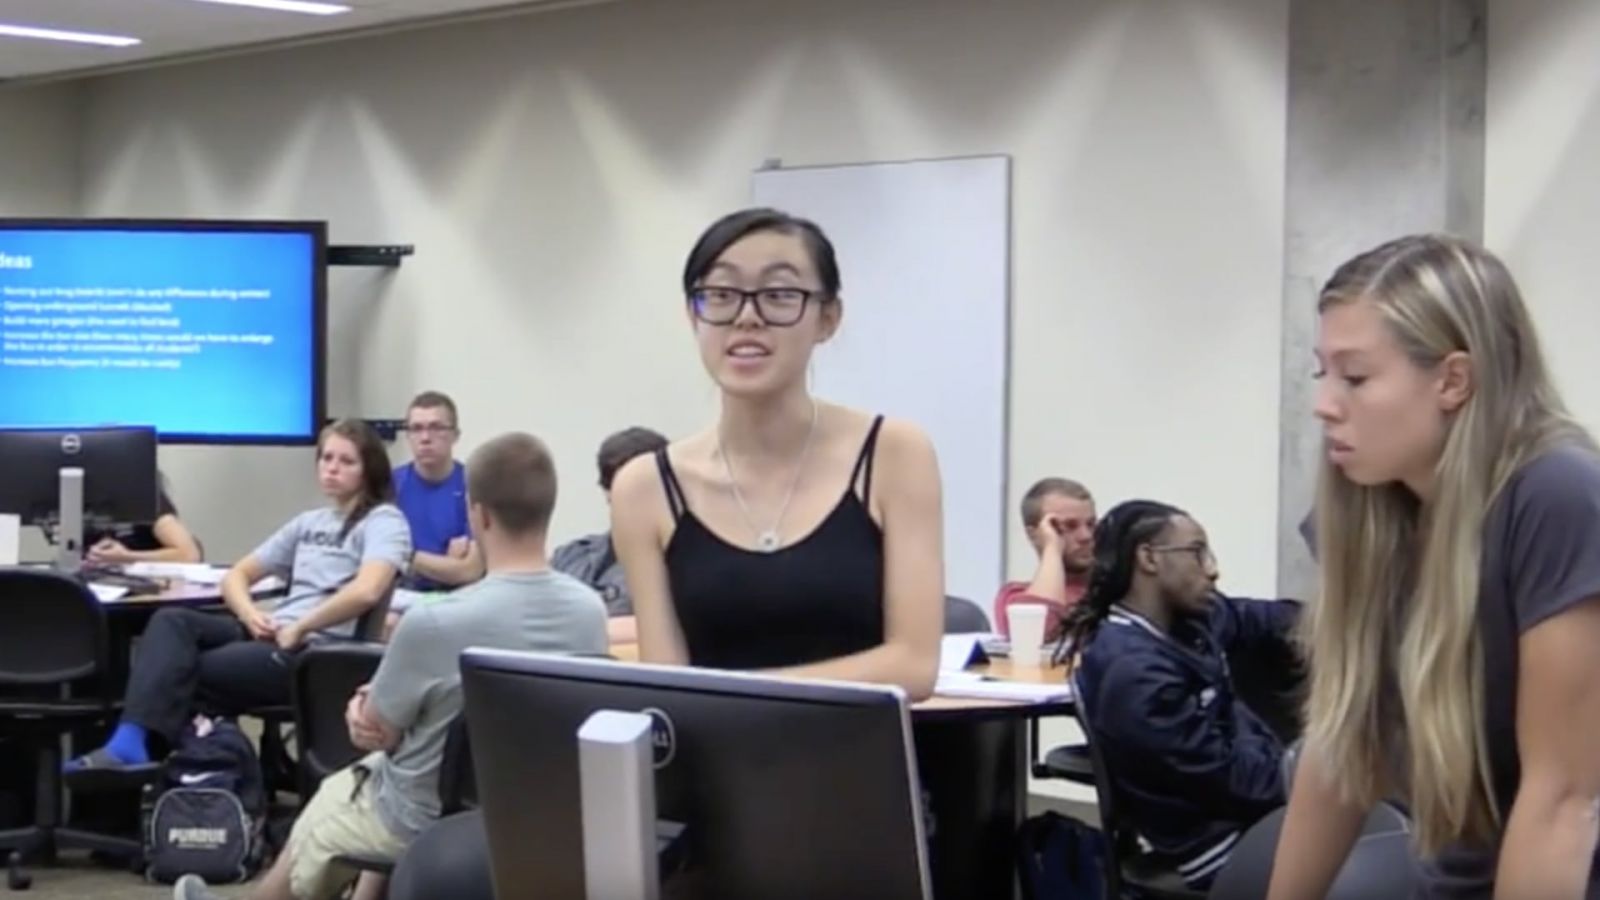 In September 2015, students present a discussion topic in an IMPACT classroom at the Hicks Undergraduate Library